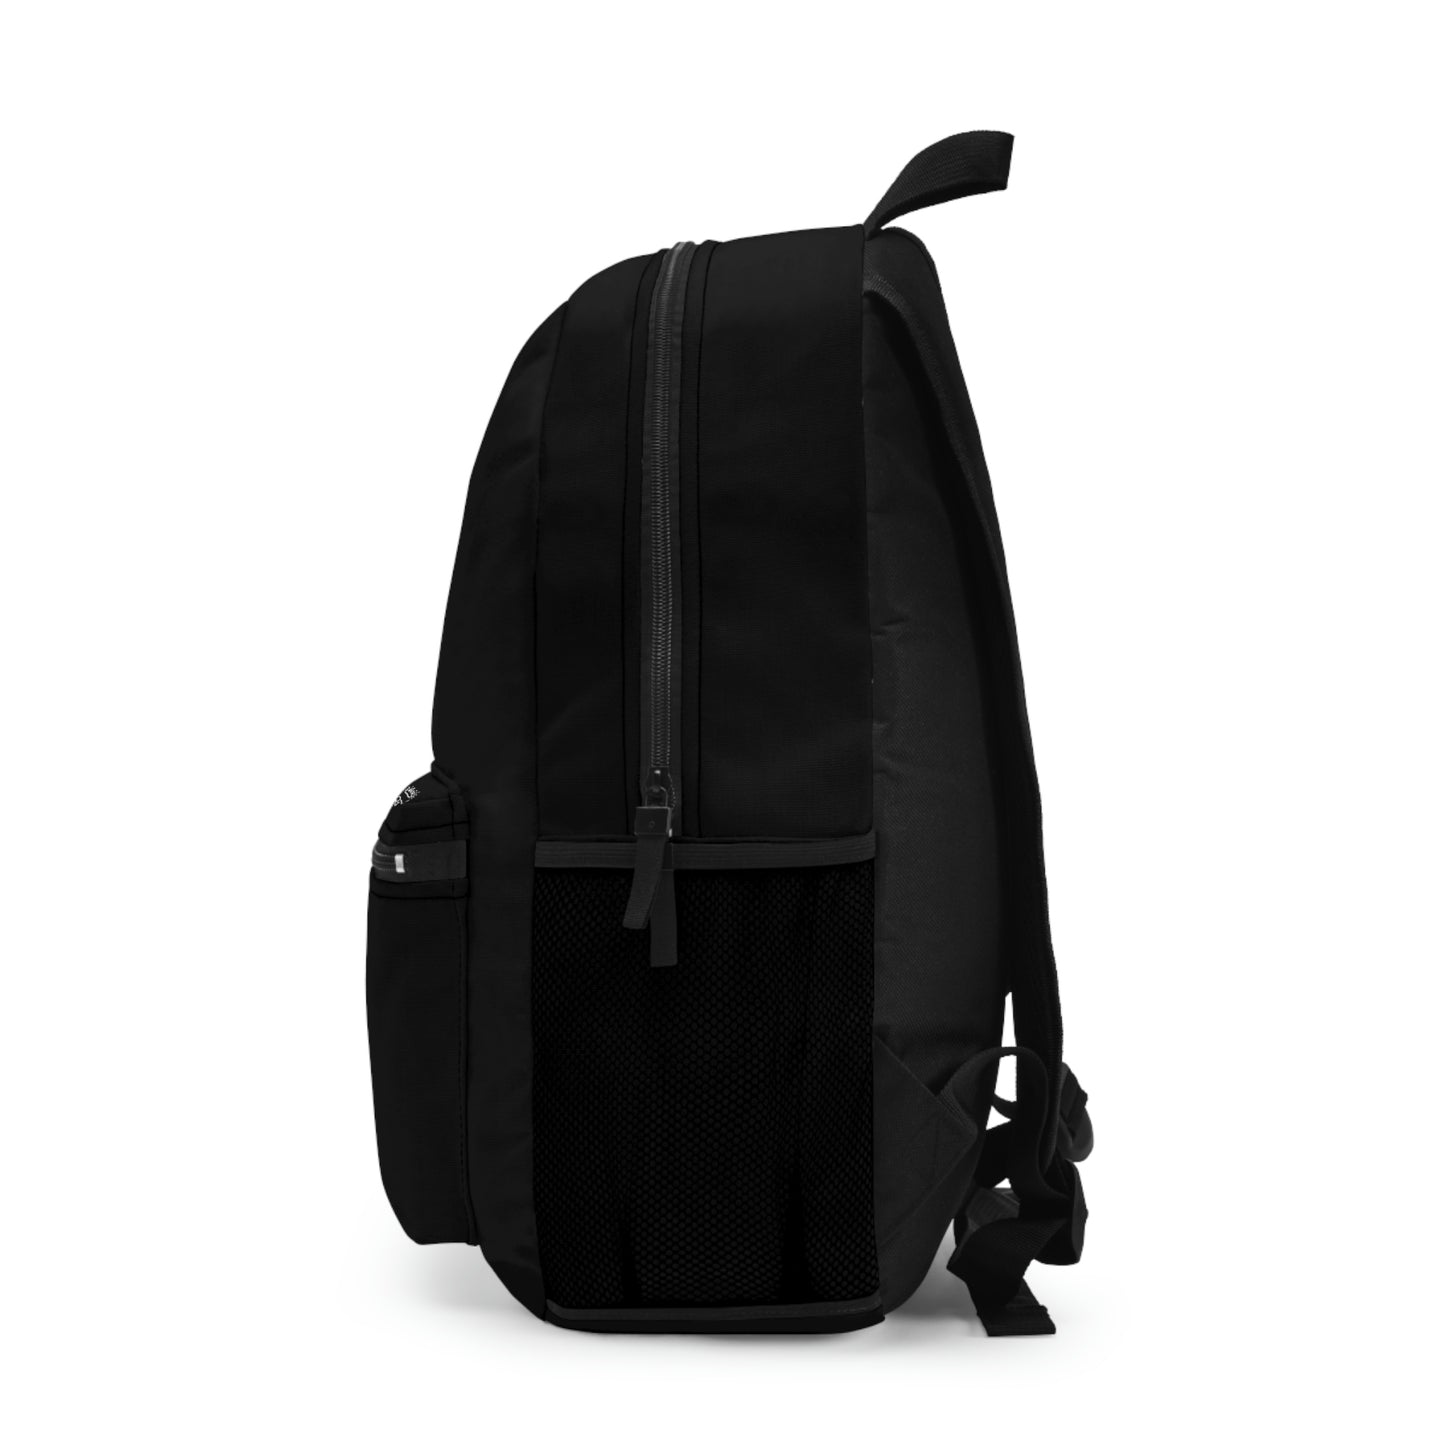 Fick and Thin Backpack